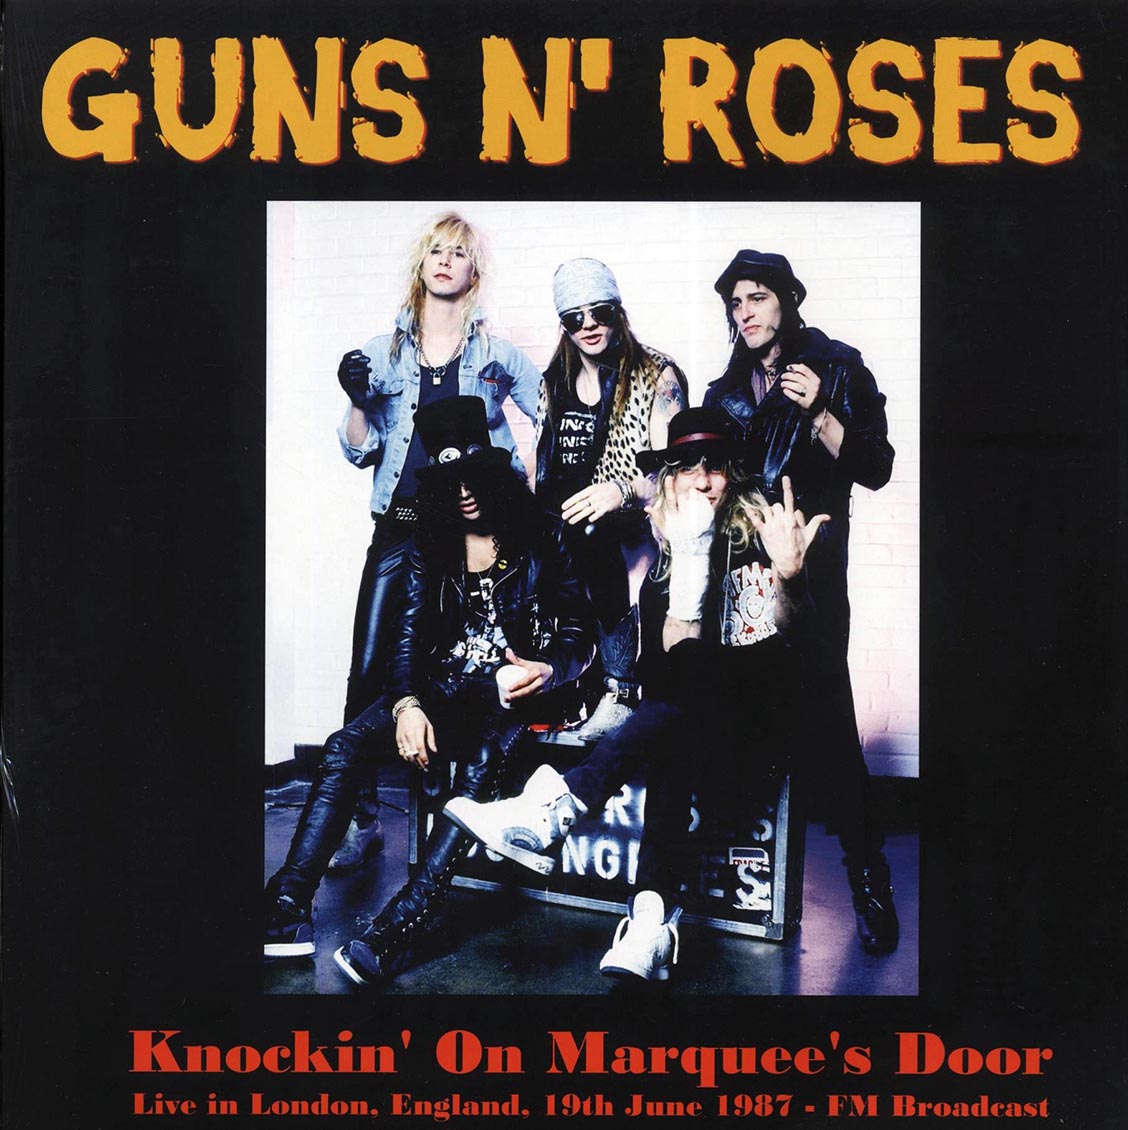 Guns N' Roses - Knockin' On Marquee's Door: Live In London, England, 19th June 1987 FM Broadcast (ltd. 500 copies made) - Vinyl LP